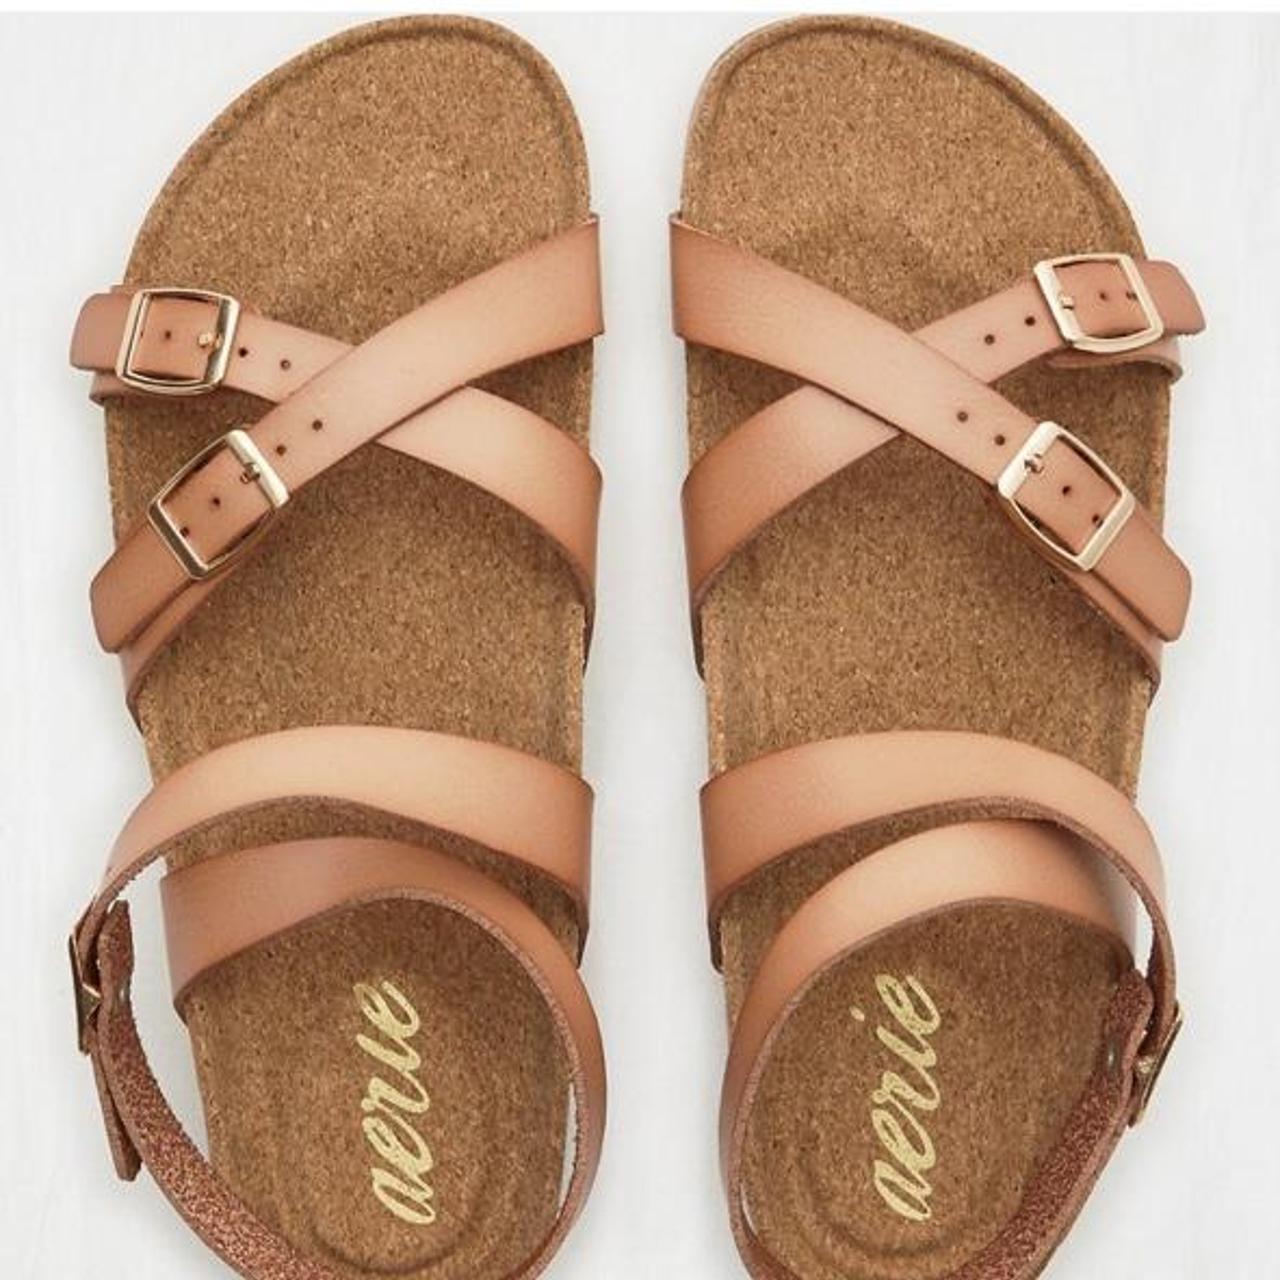 Aerie Women's Tan and Brown Sandals (2)